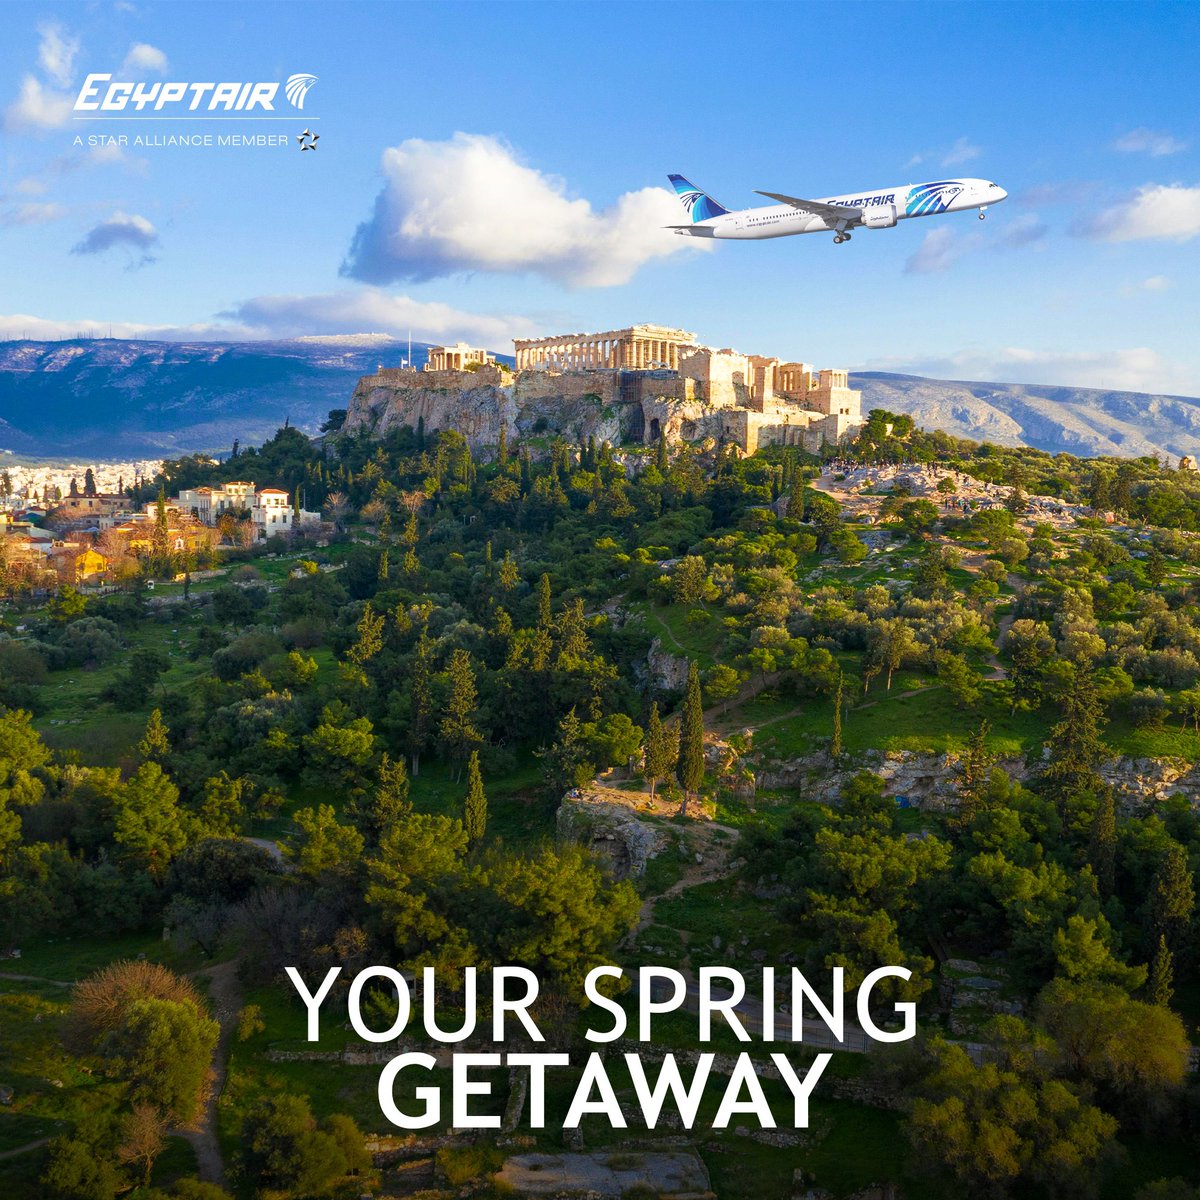 Experience the vibrant allure of spring in Athens with #EGYPTAIR! Delight in blooming gardens, stroll through ancient ruins, and immerse yourself in the city's captivating charm. Book your spring getaway now at egyptair.com